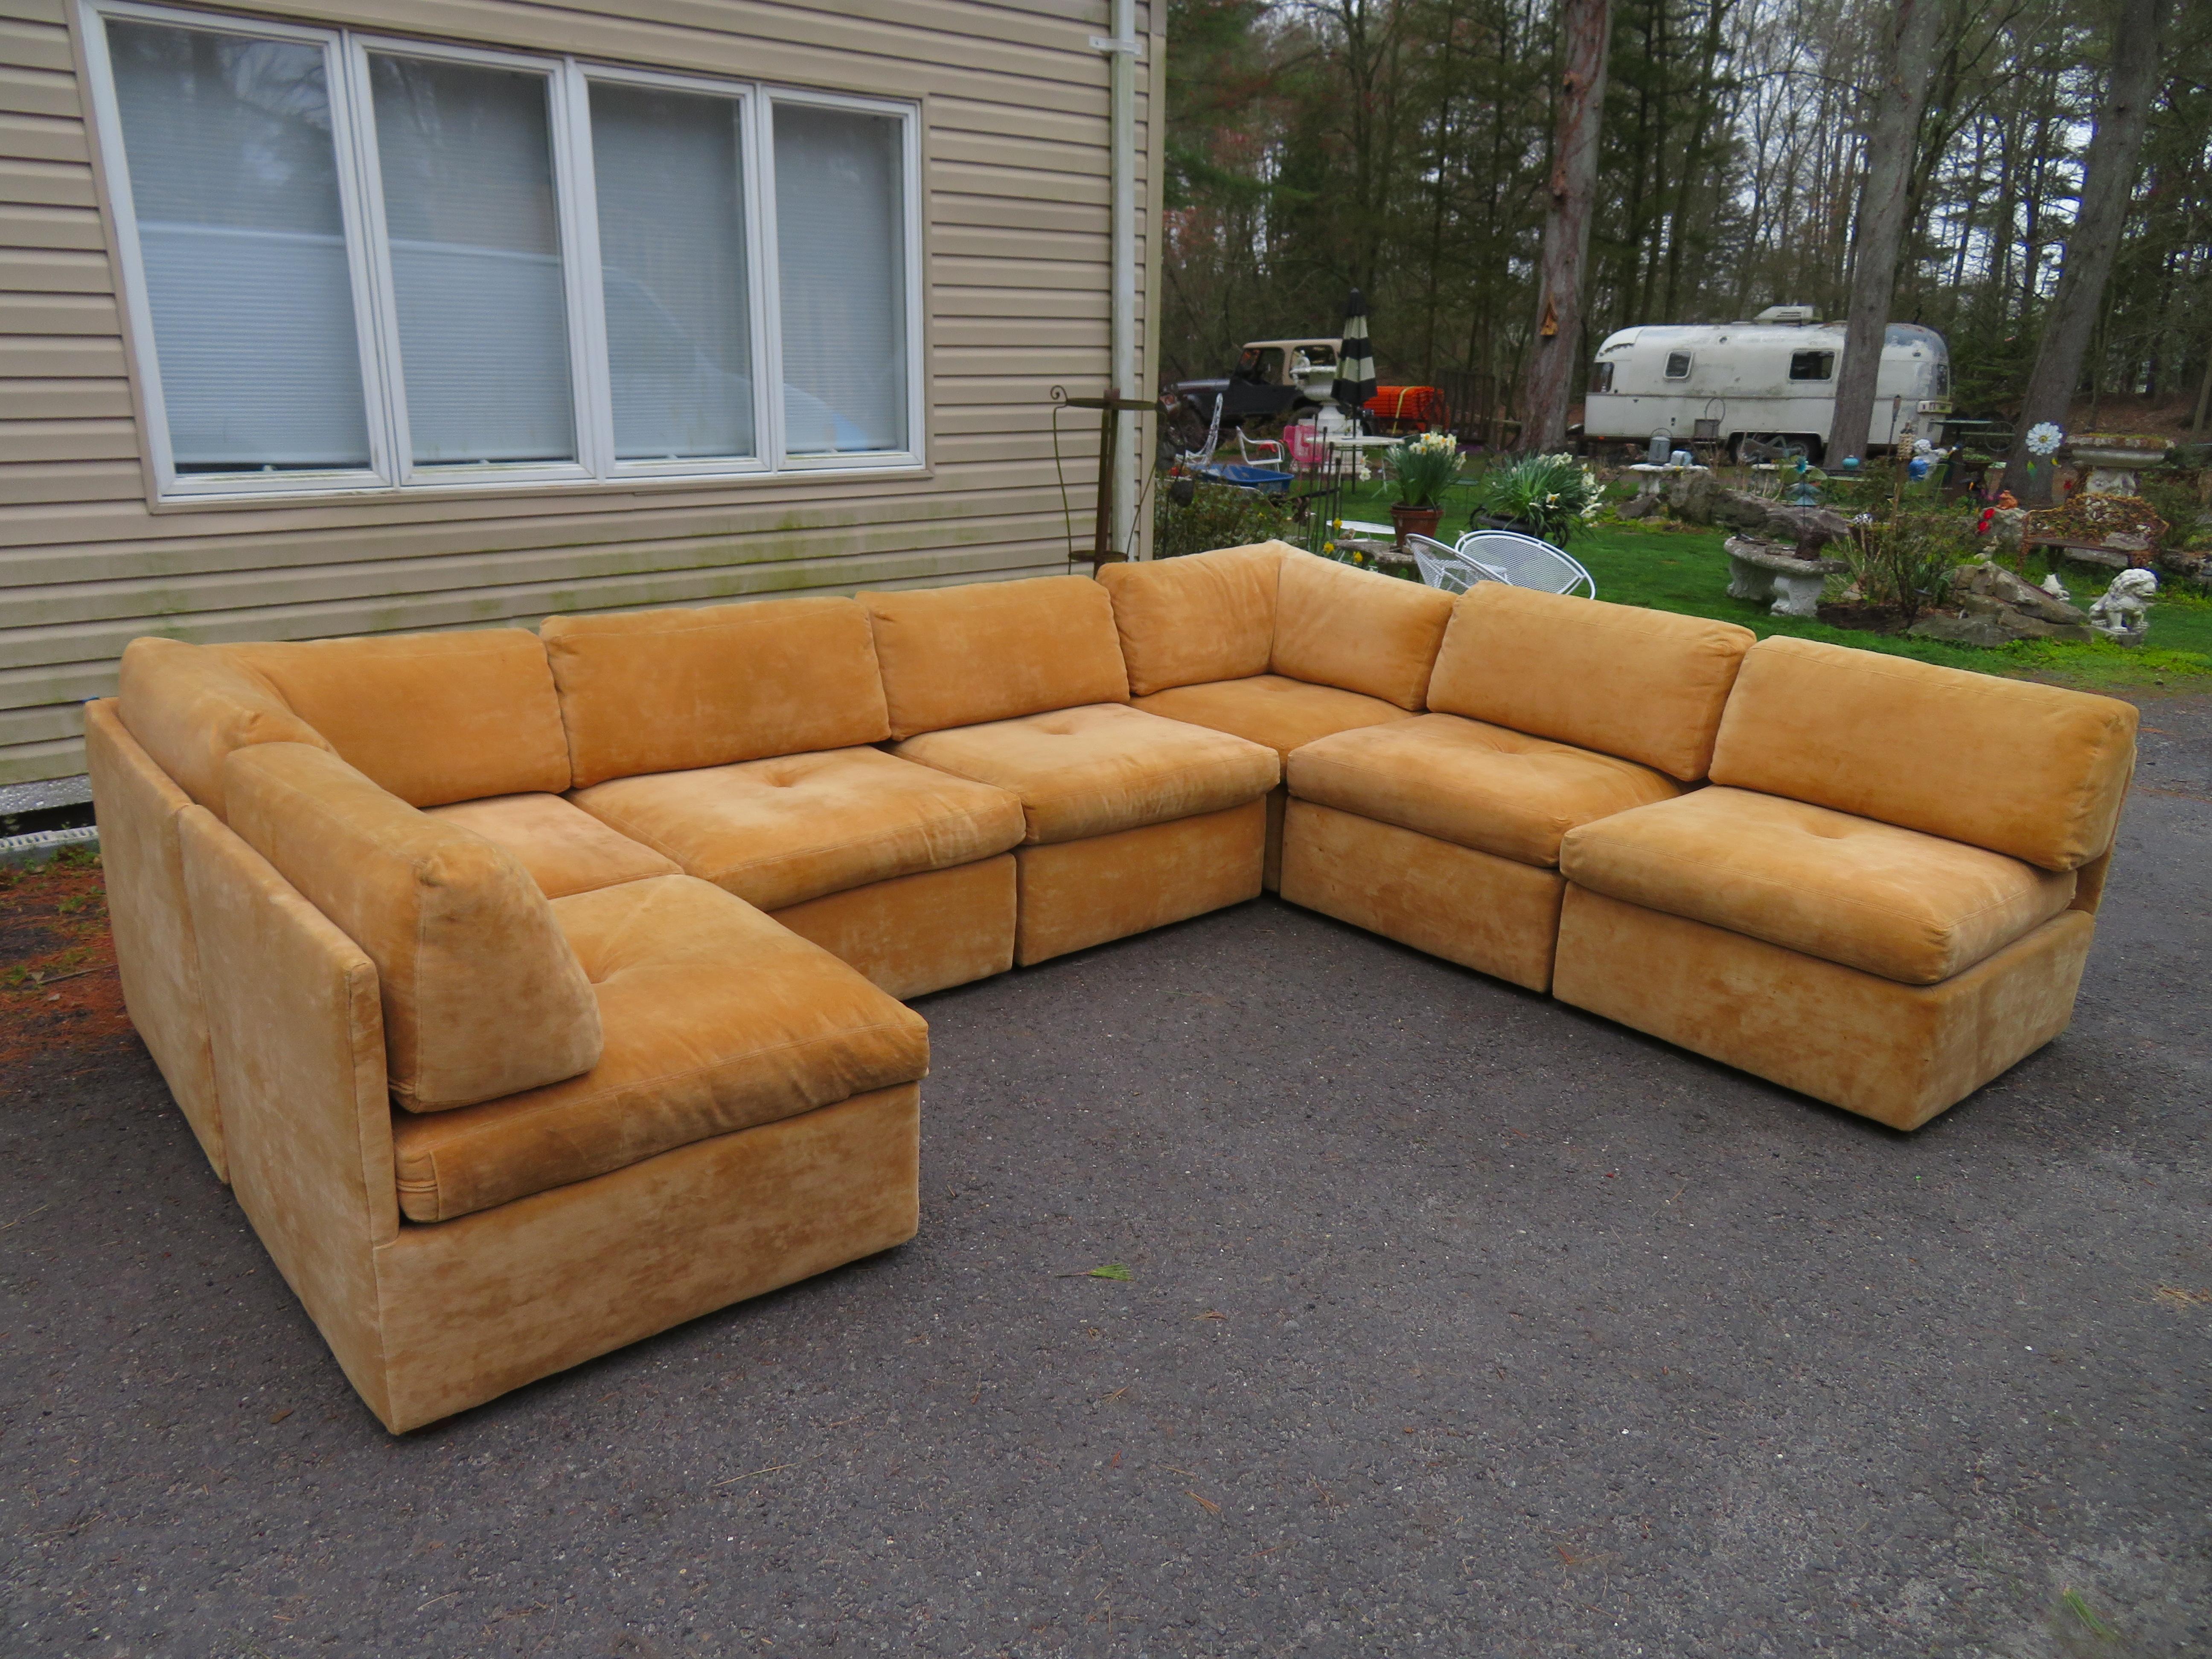 Wonderful 7-piece Milo Baughman style cube sectional sofa. We love this super clean tan velvet sectional in remarkable original condition-shows only minor signs of age. During the mid-century, many furniture companies such as Thayer Coggin and Selig